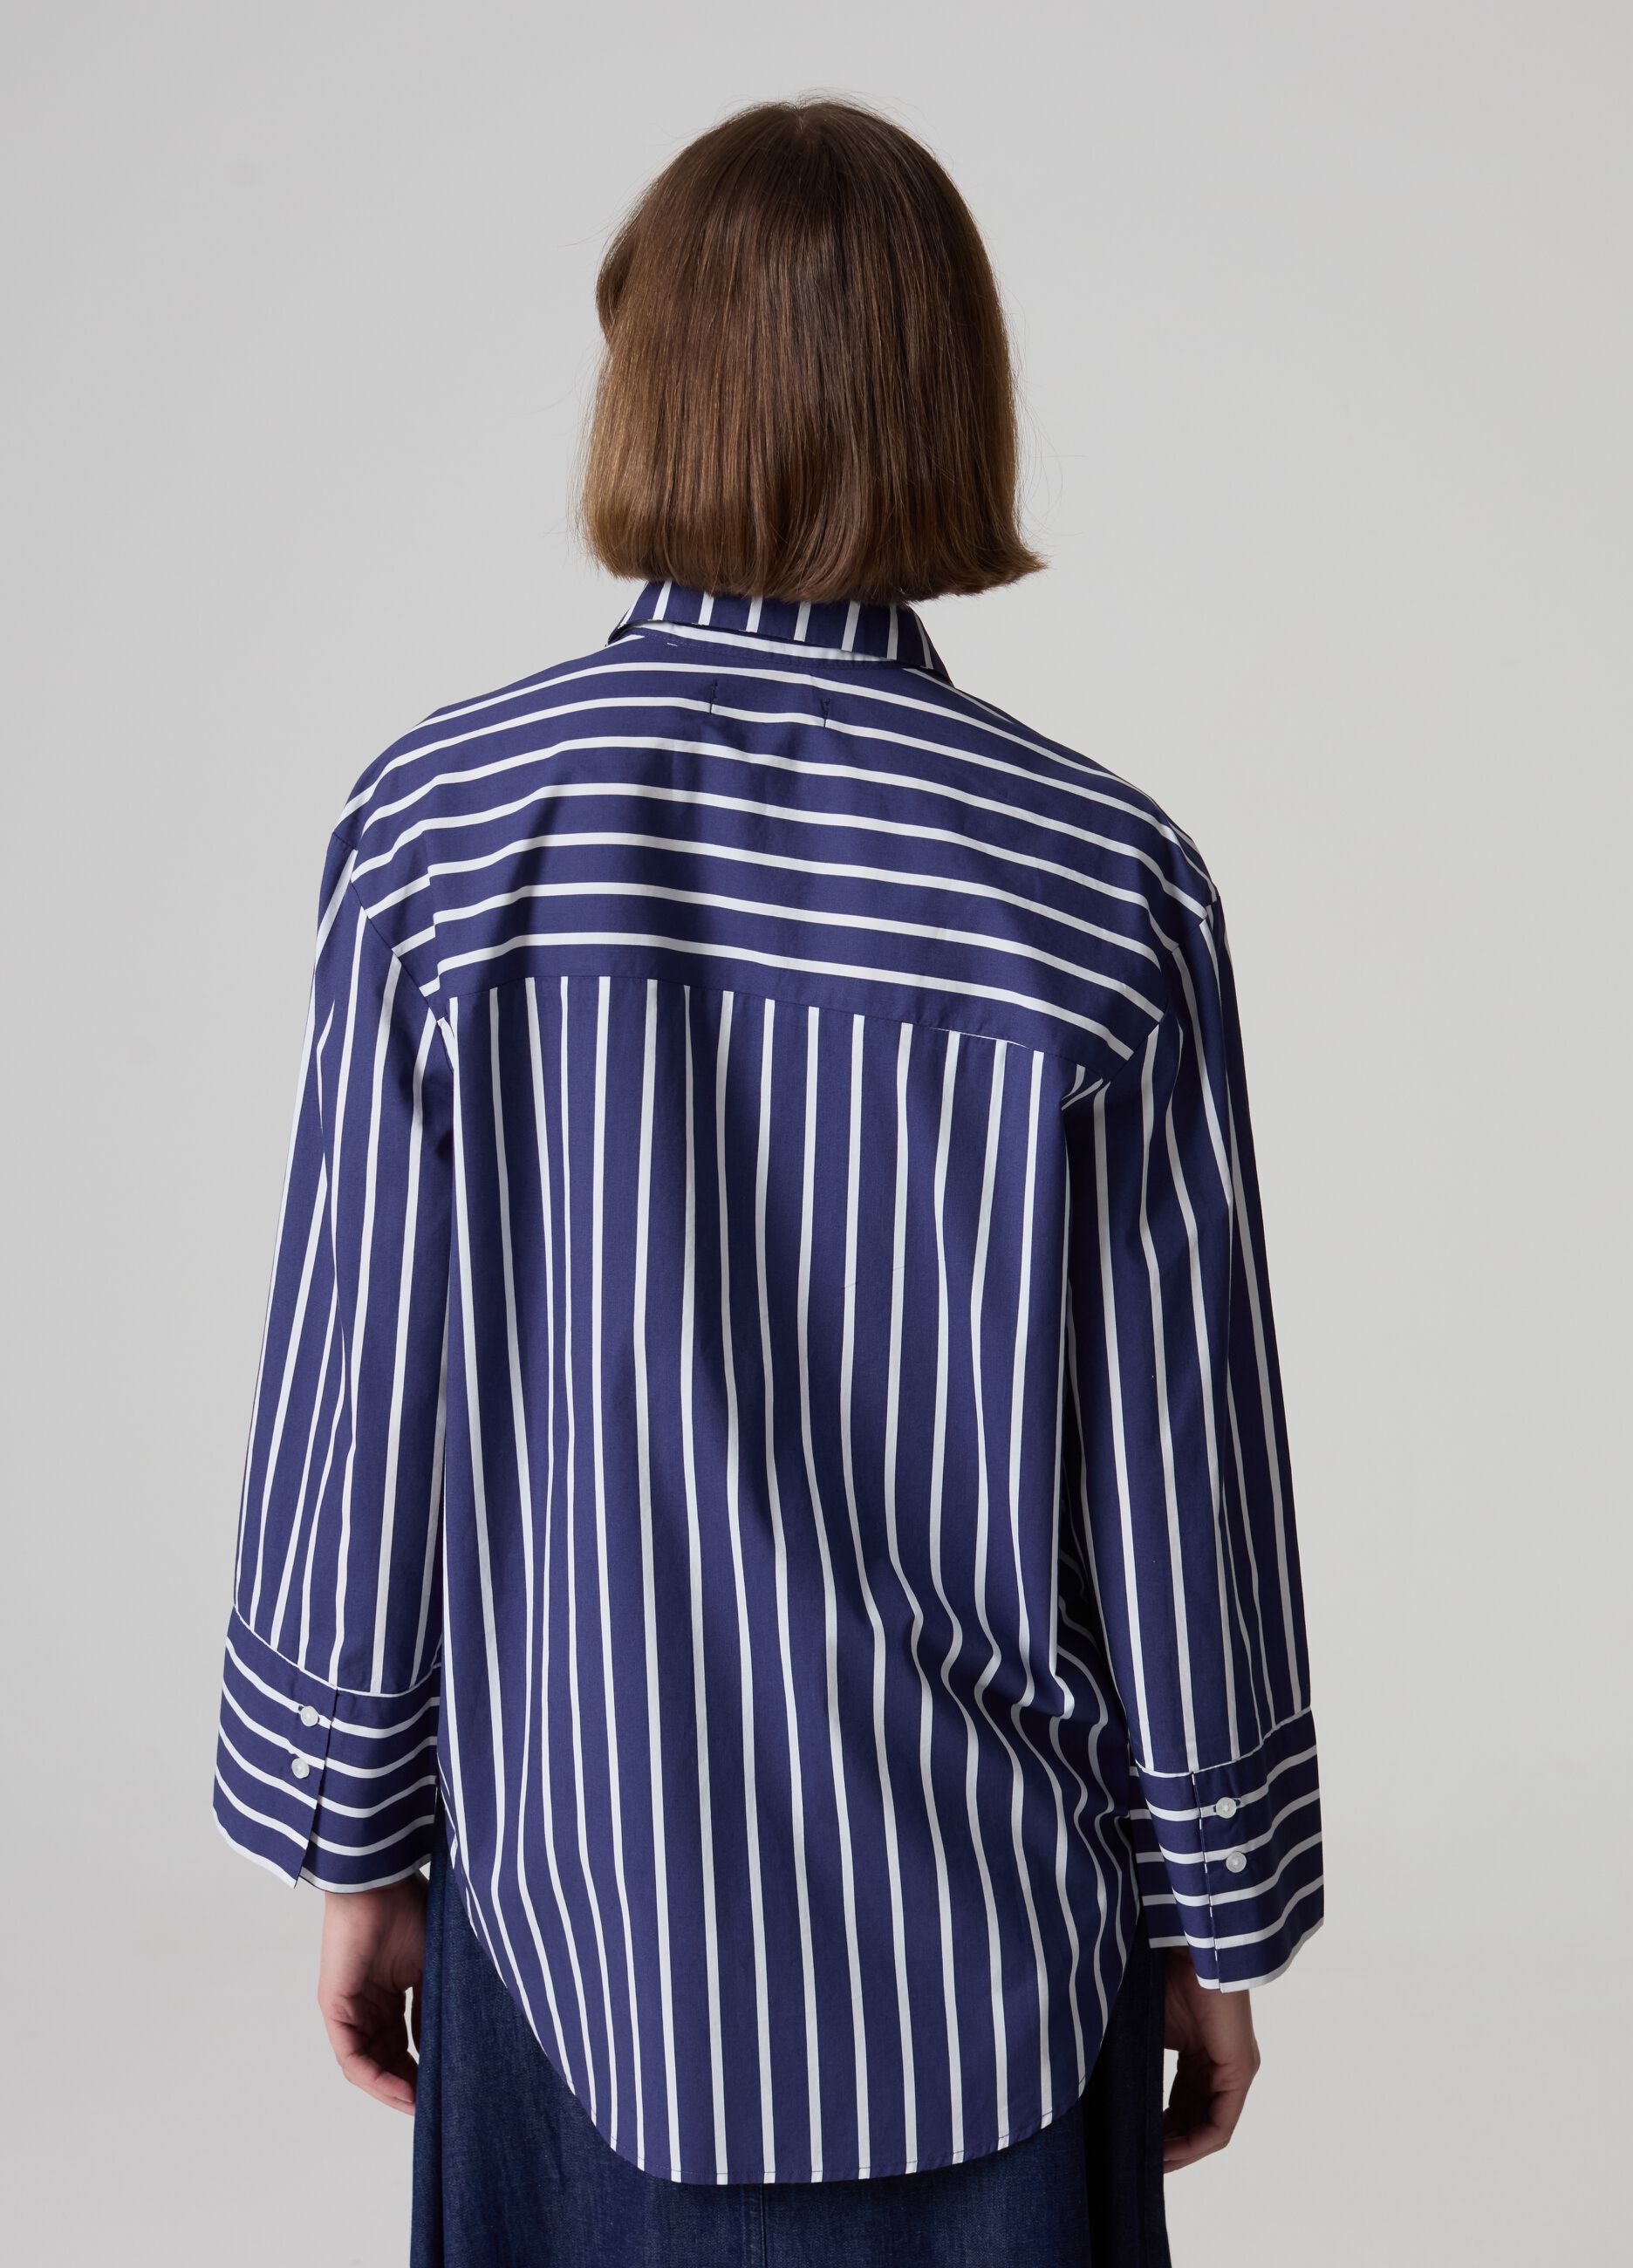 Striped shirt with pockets